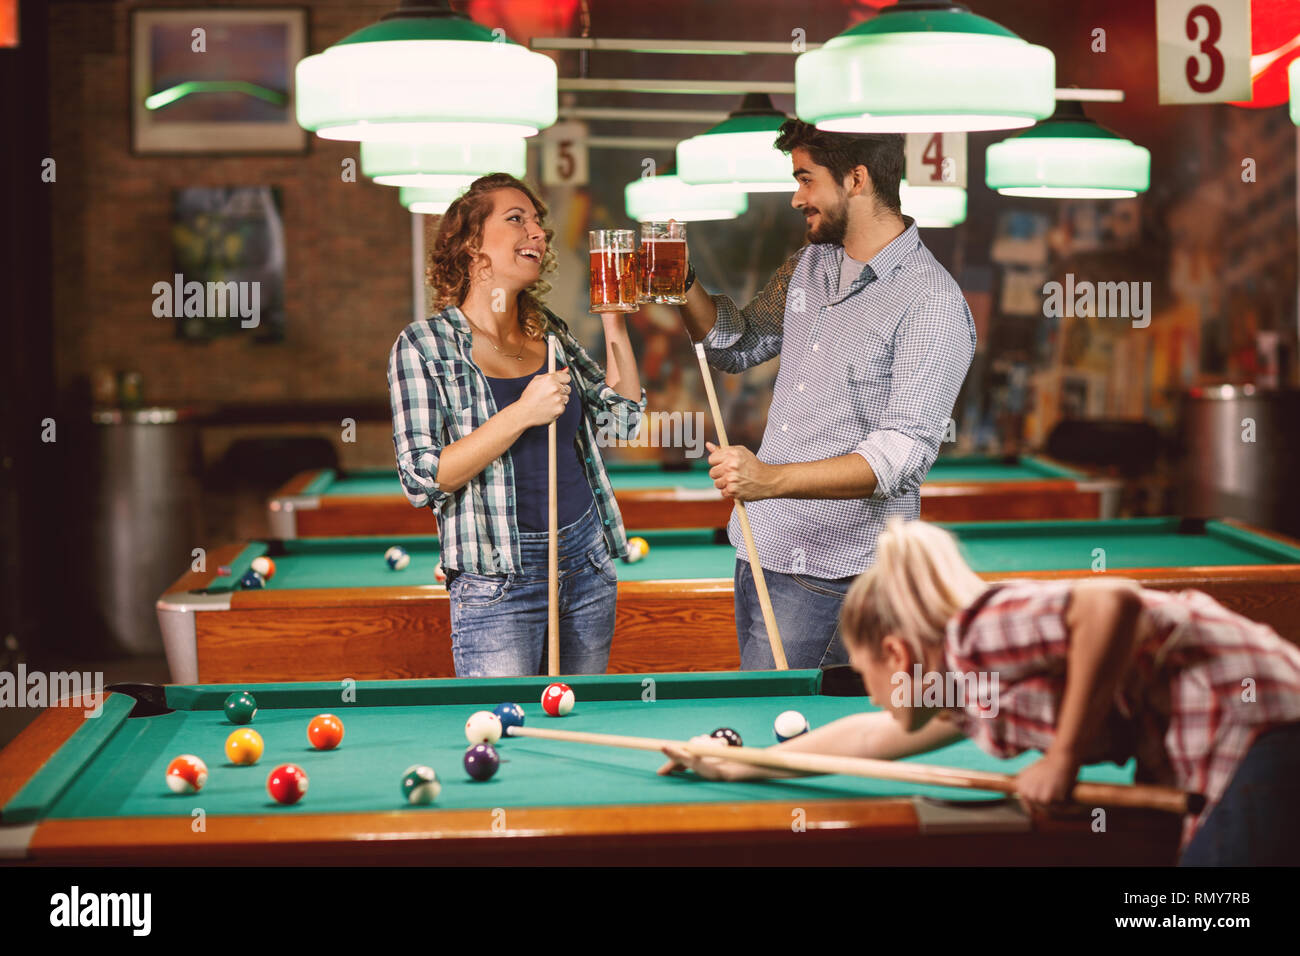 Young smiling friends playing snooker or billiard Stock Photo